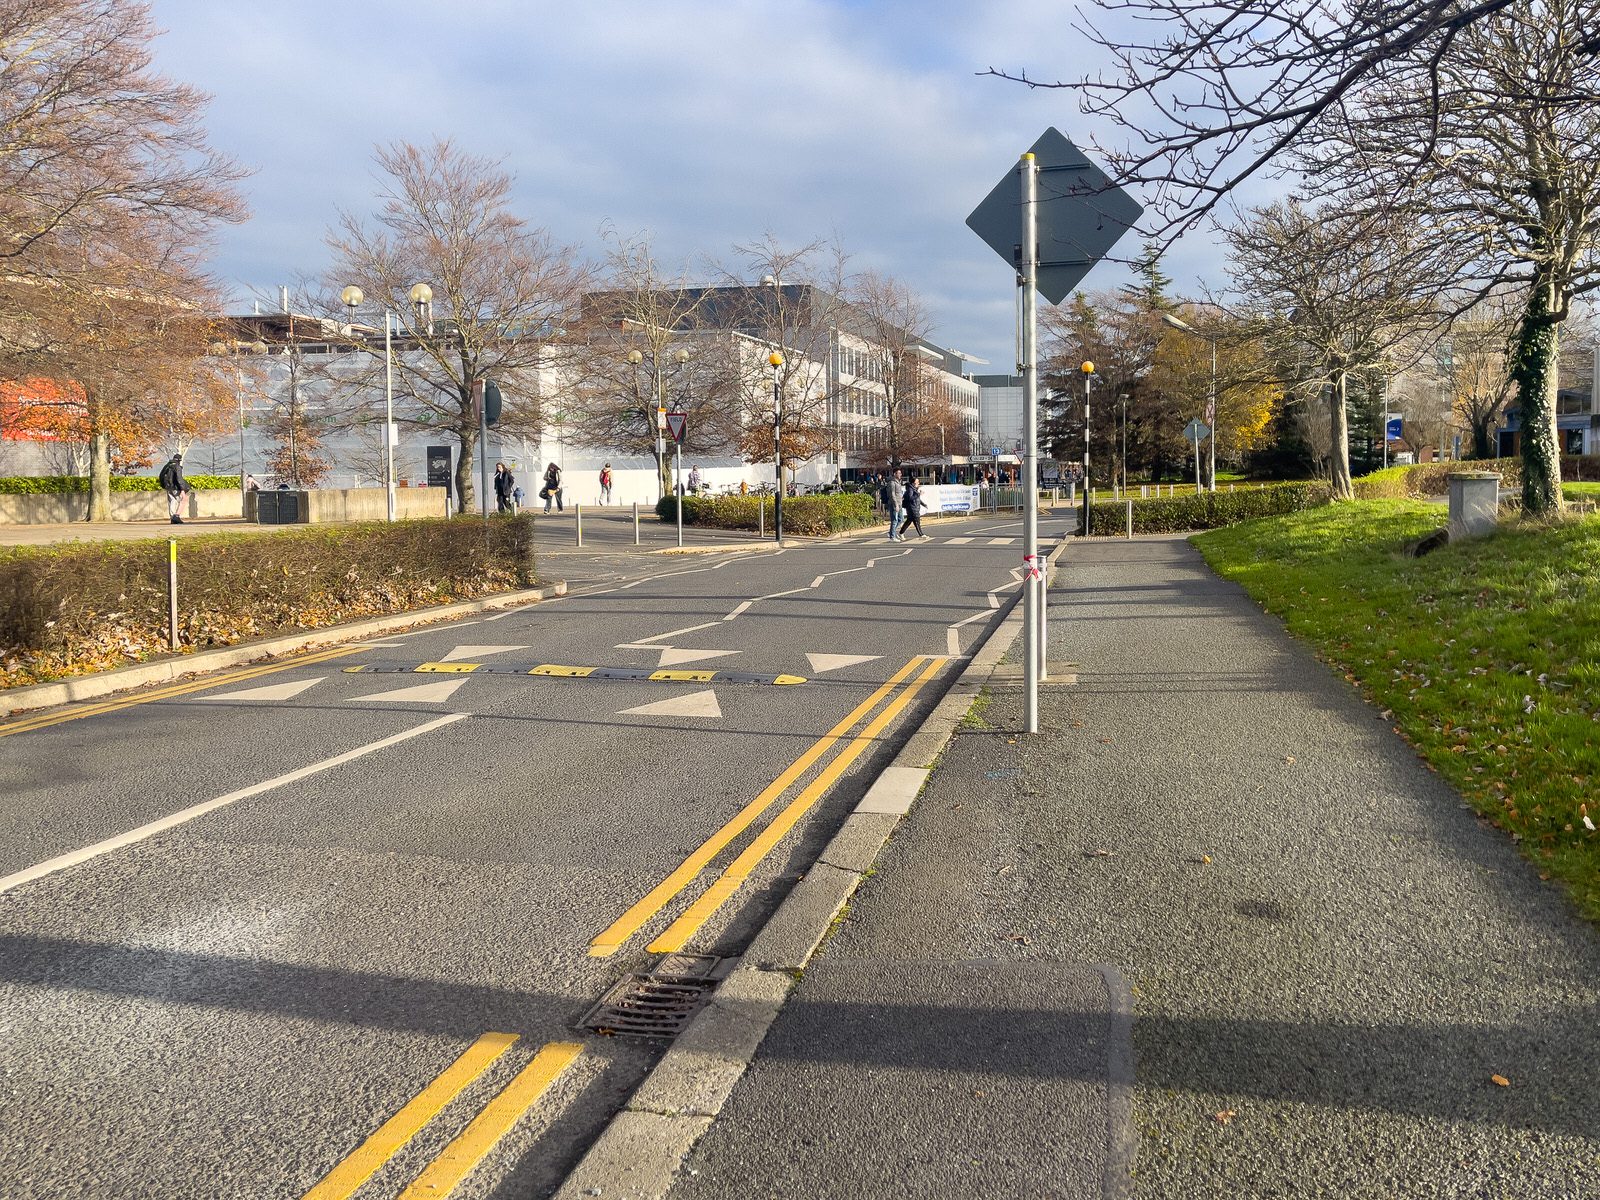 MY FIRST DAY WITHOUT THE 17 BUS SERVICE [WALK FROM S4 BUS STOP IN UCD TO ROEBUCK ROAD]-225569-1